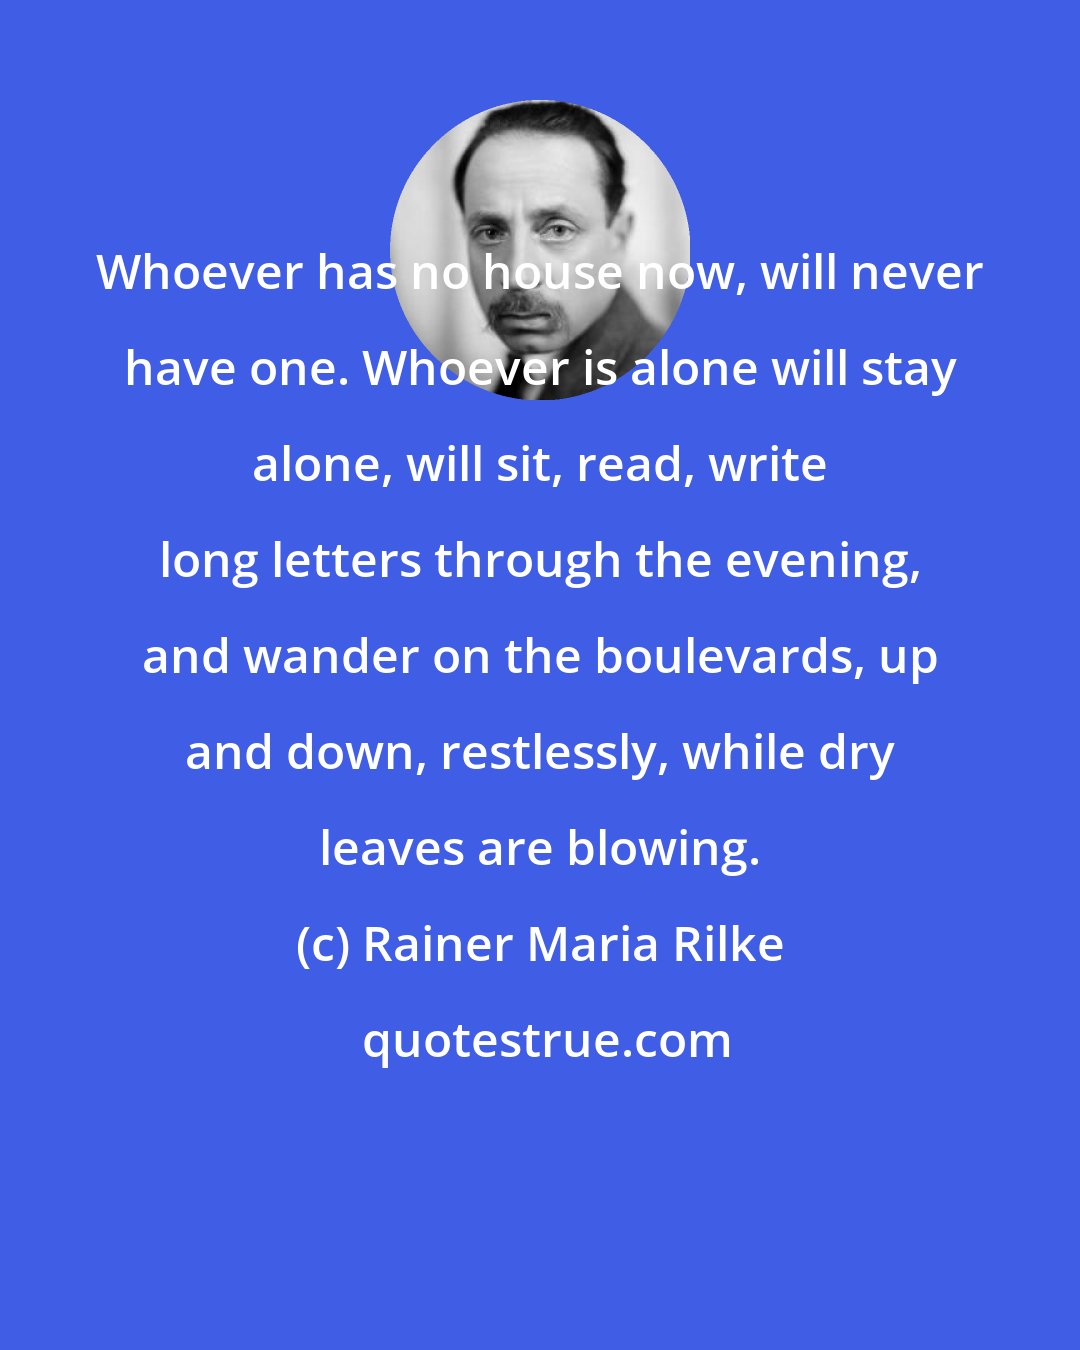 Rainer Maria Rilke: Whoever has no house now, will never have one. Whoever is alone will stay alone, will sit, read, write long letters through the evening, and wander on the boulevards, up and down, restlessly, while dry leaves are blowing.